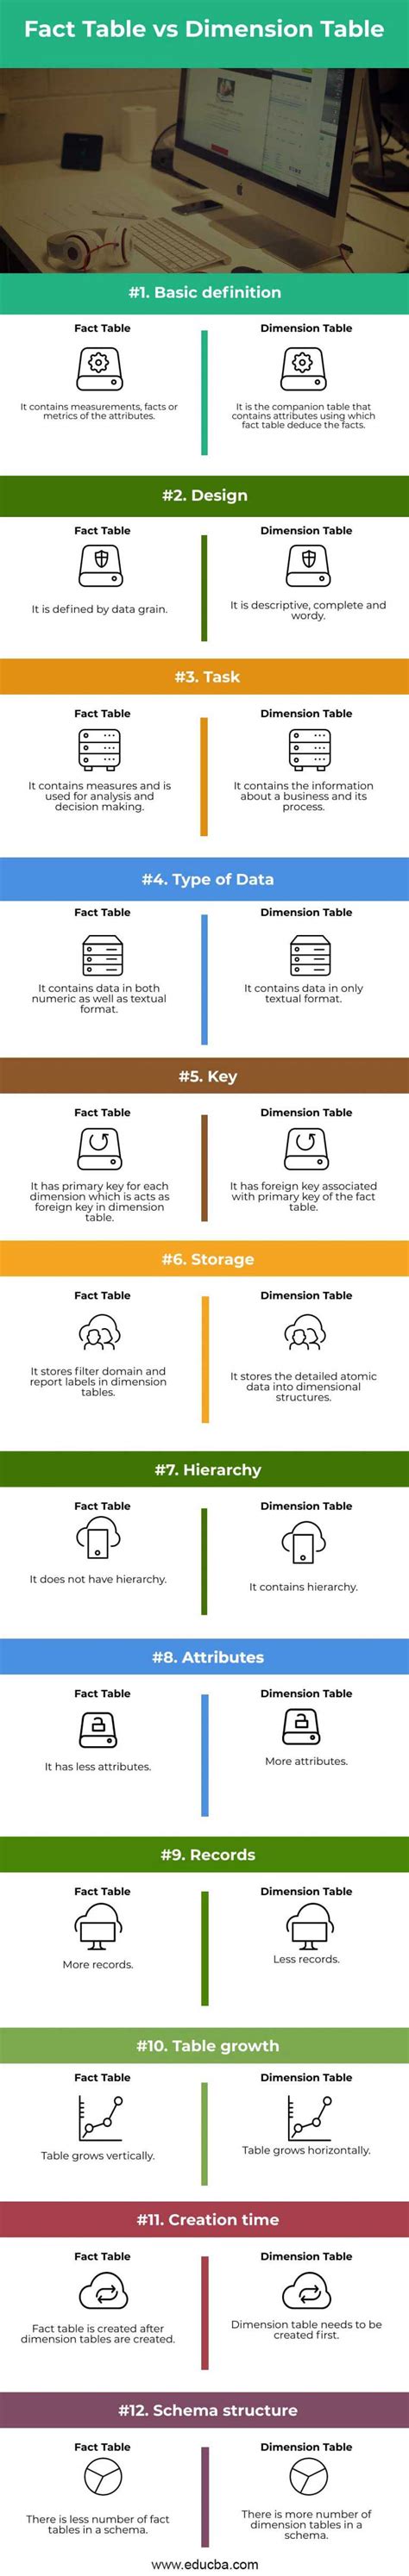 Fact Table Vs Dimension Table Learn The Top 12 Differences